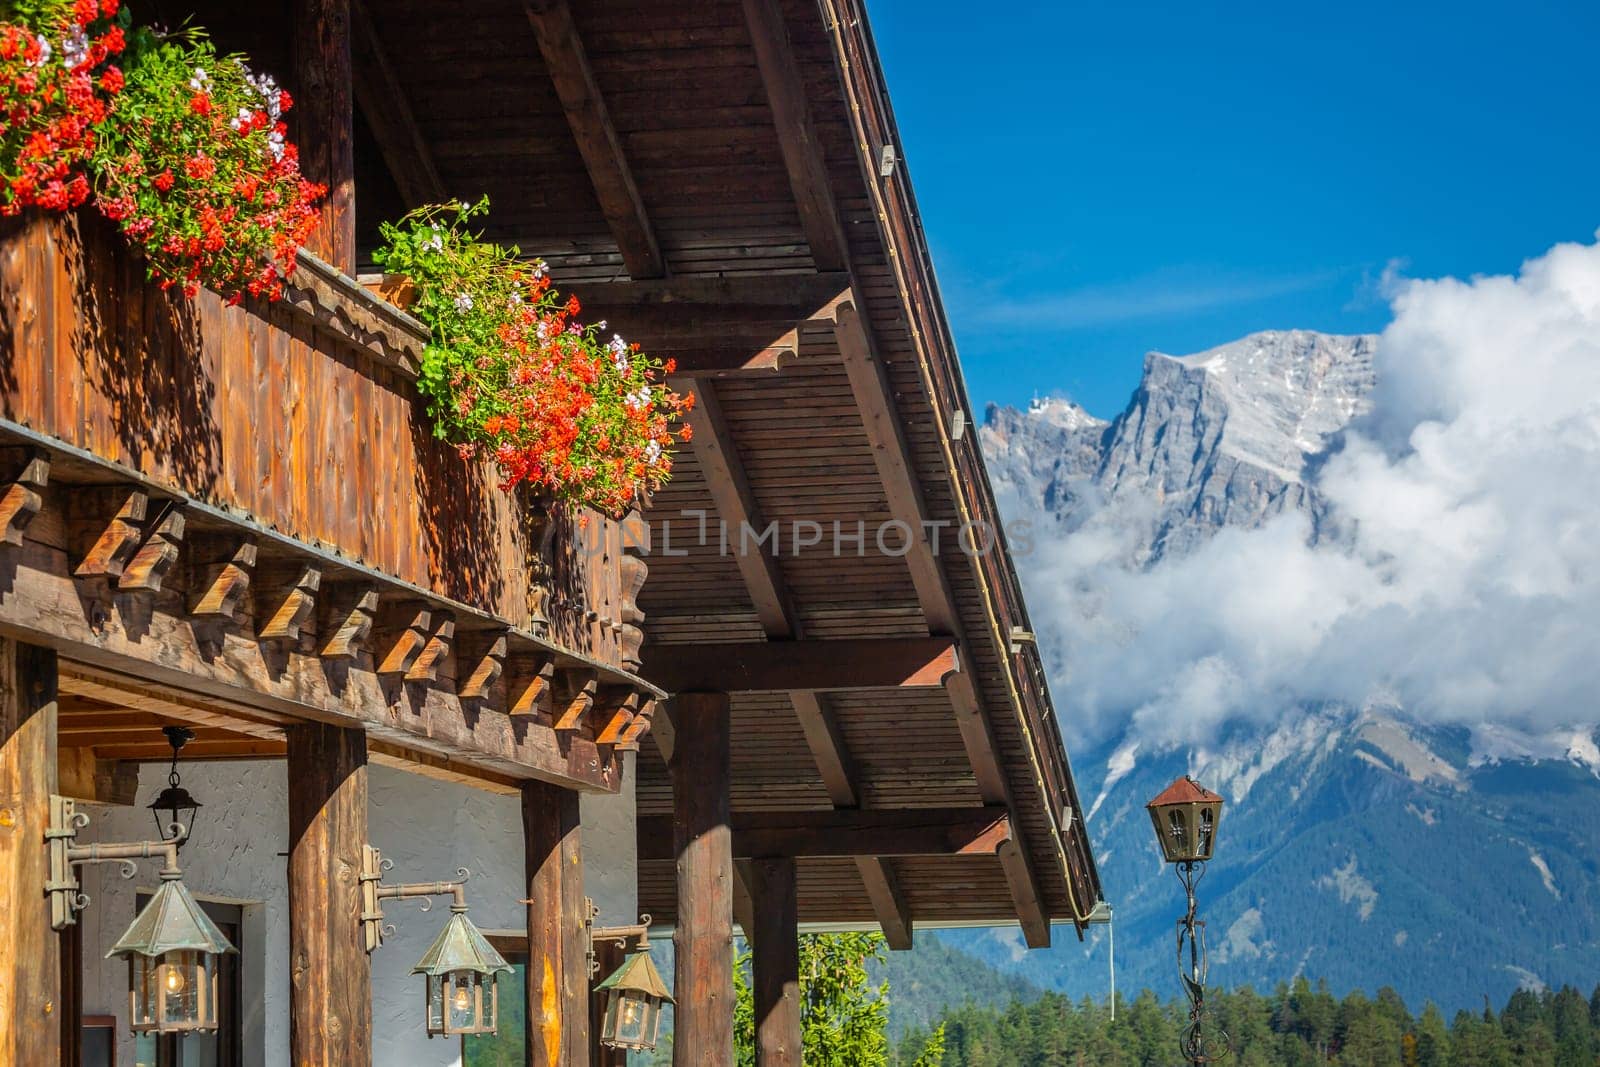 Alpine Chalet with flowers at springtime, facing Zugspitze mountain, Bavarian Alps, Germany